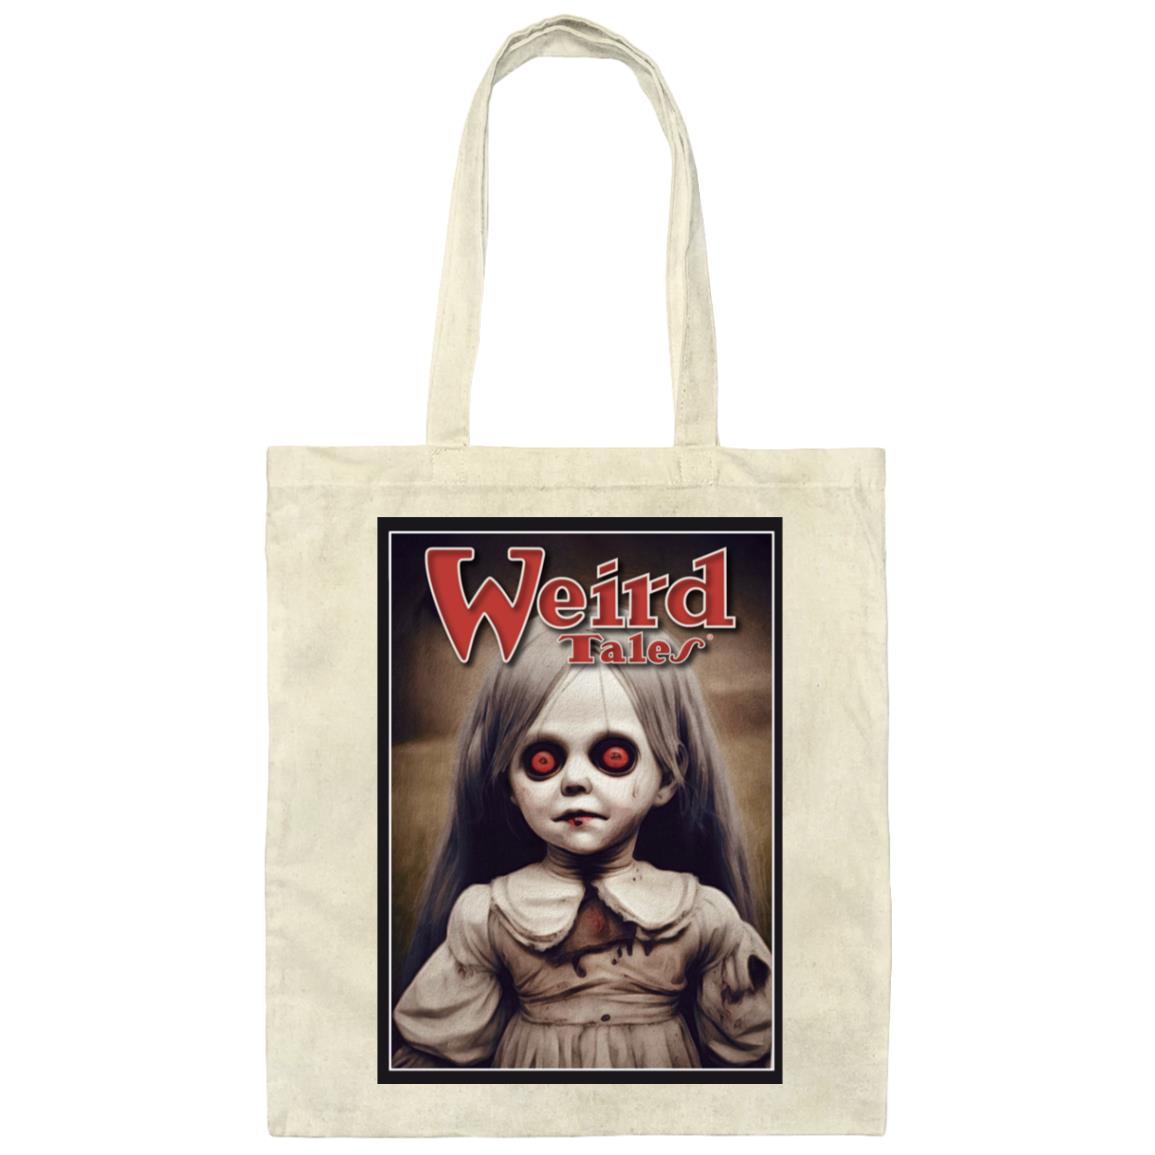 Weird Tales Creepy Doll "Mildred" Canvas Tote Bag